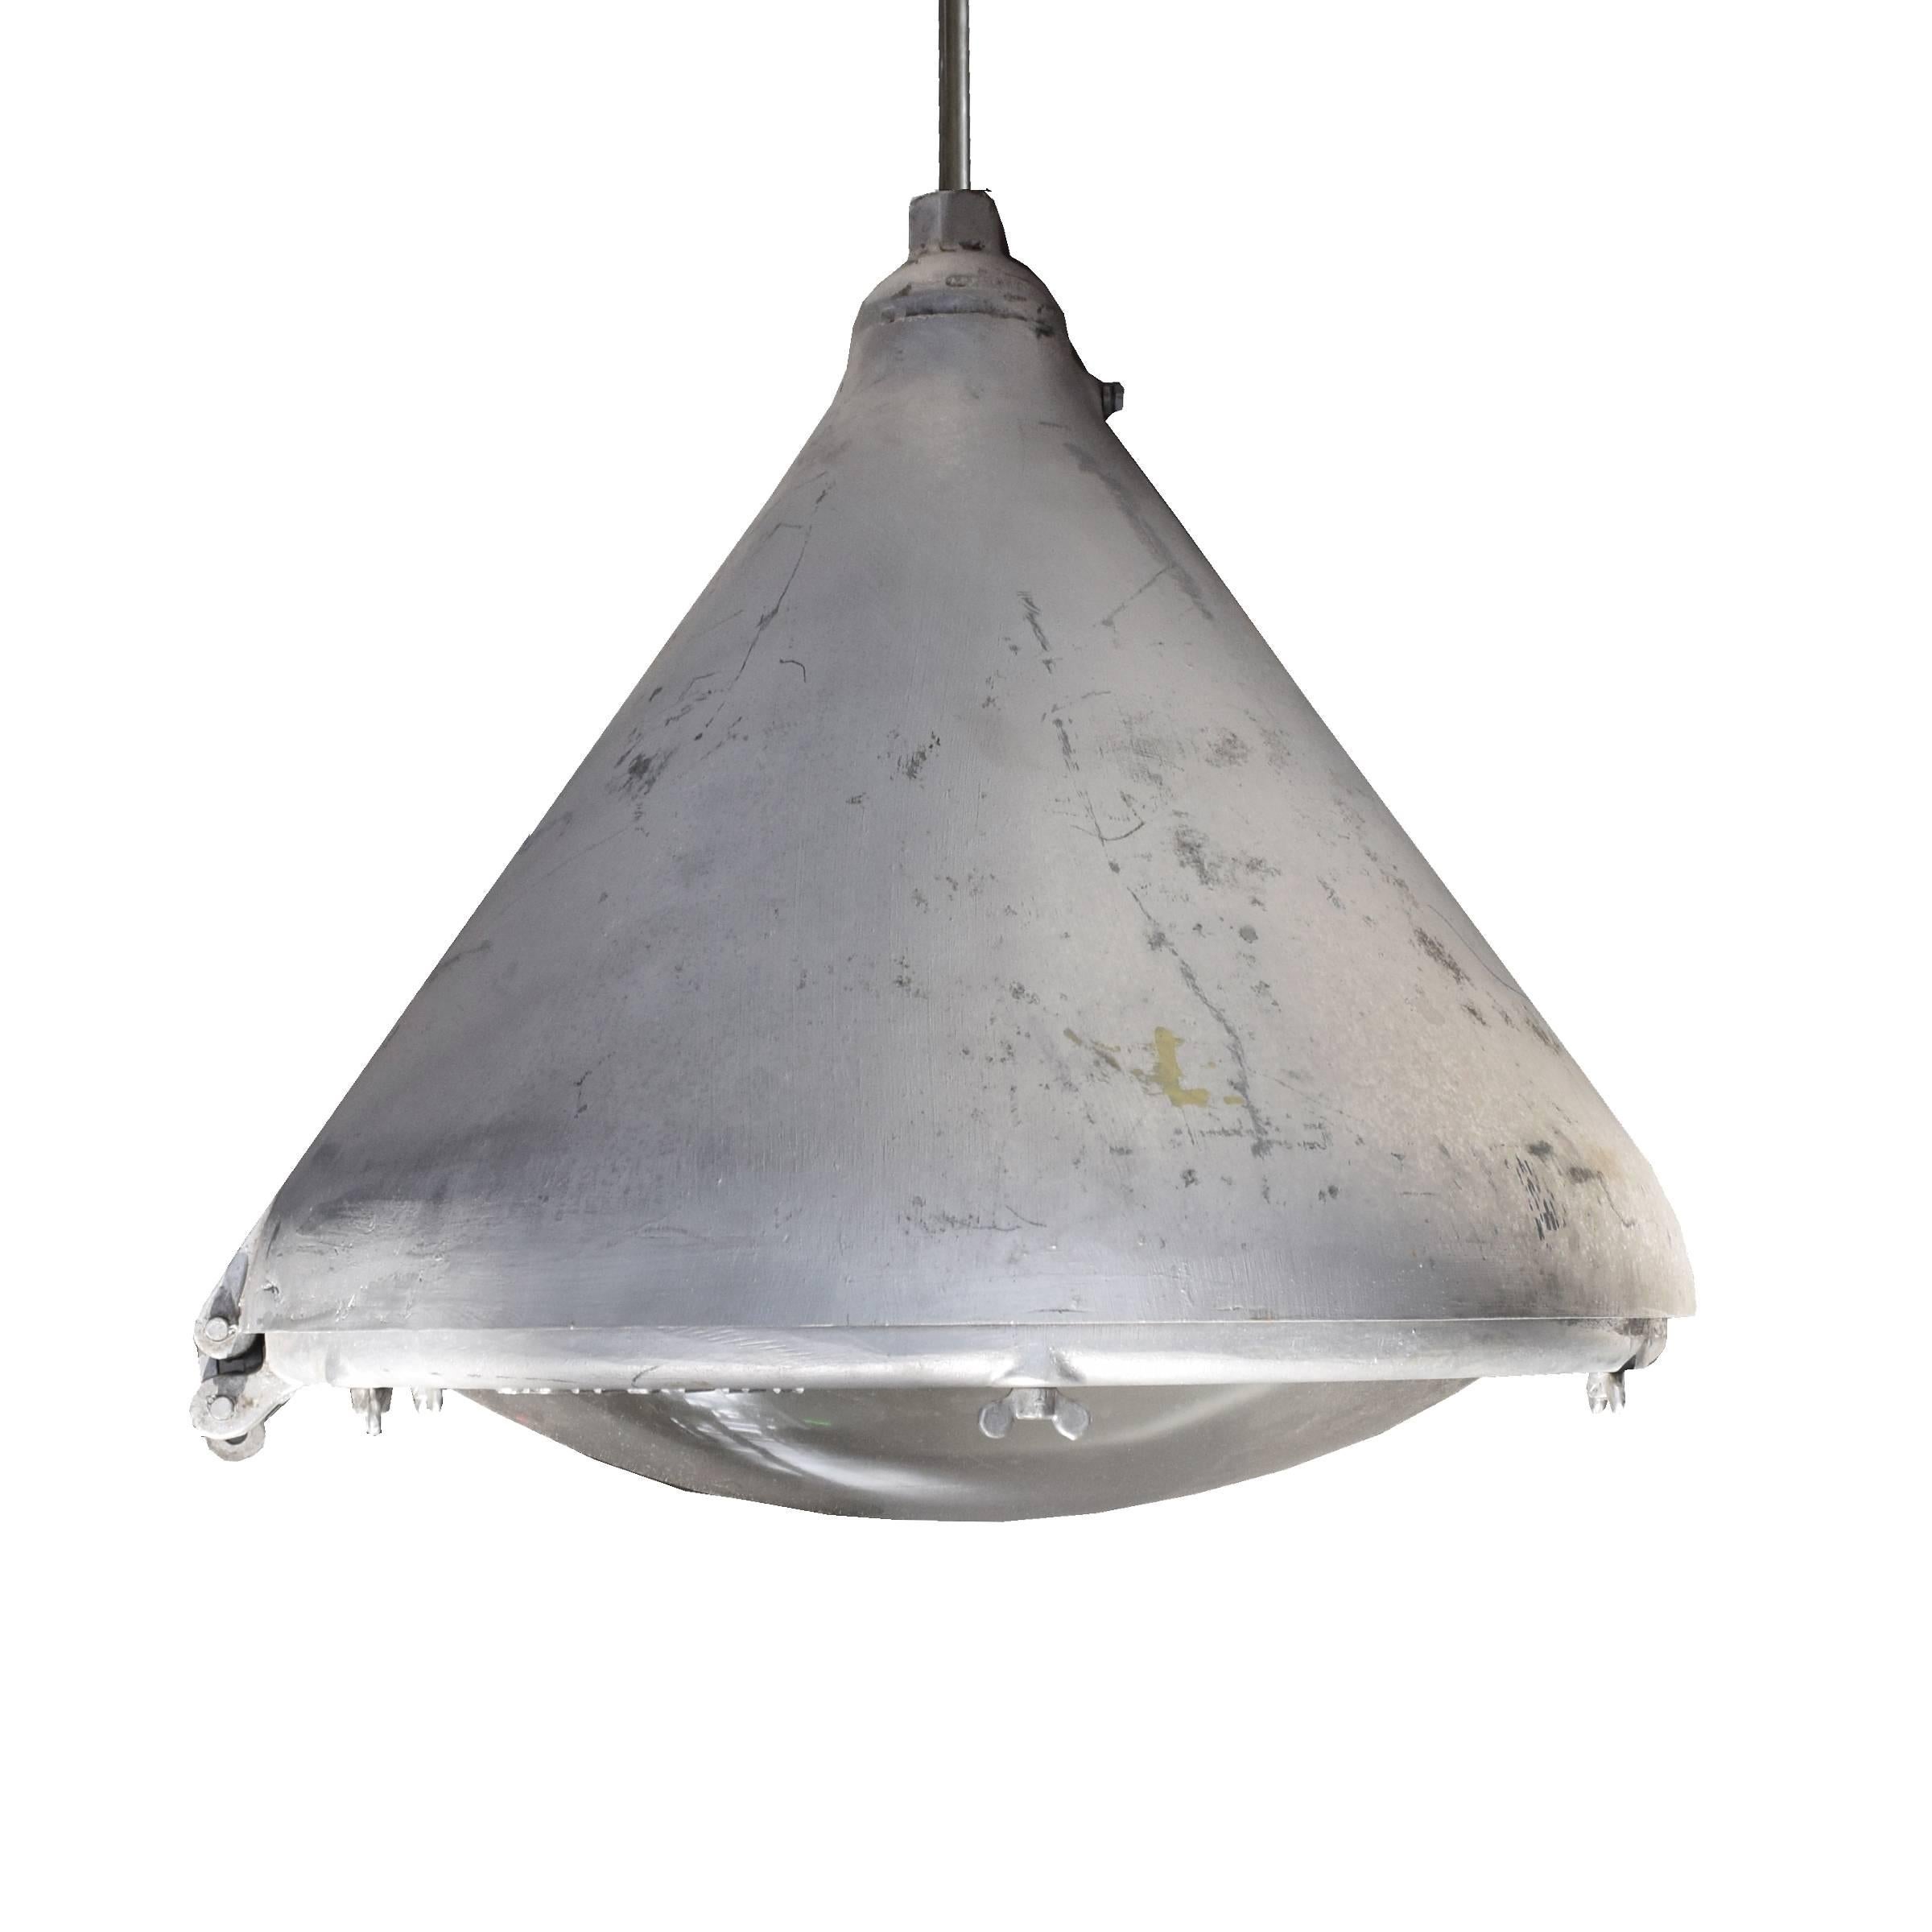 An American Industrial light fixture in an unusual form with Pyrex 'dust tight' glass shades manufactured by the Appleton Electric Company of Wisconsin. Four available.